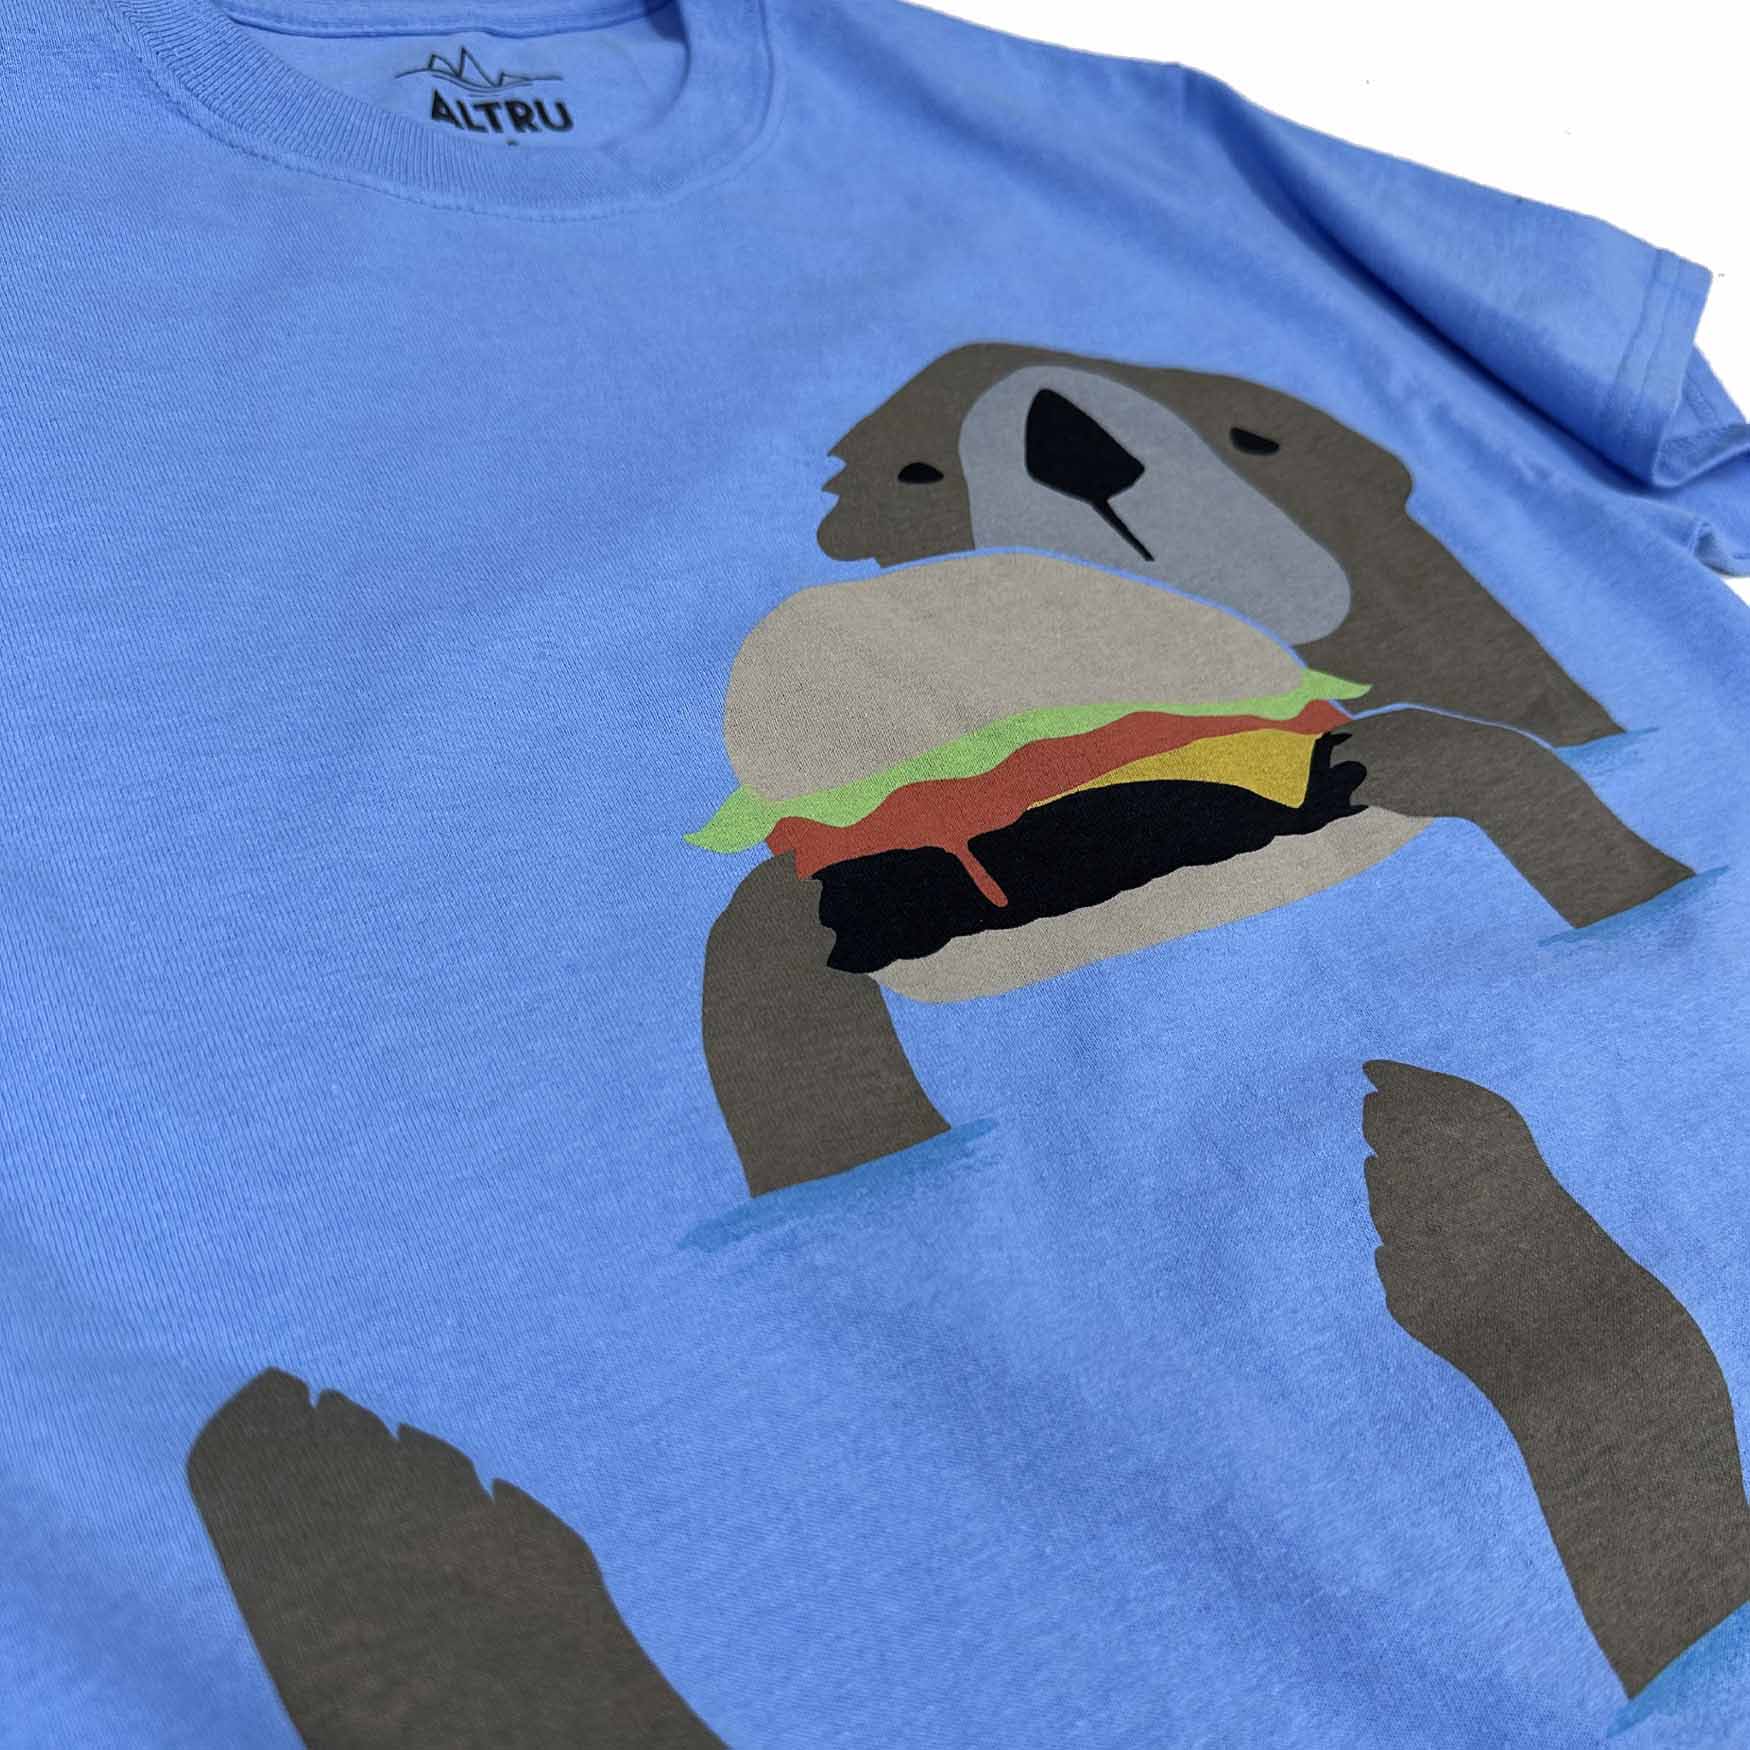 Otter Eating Hamburger graphic tee by Altru Apparel